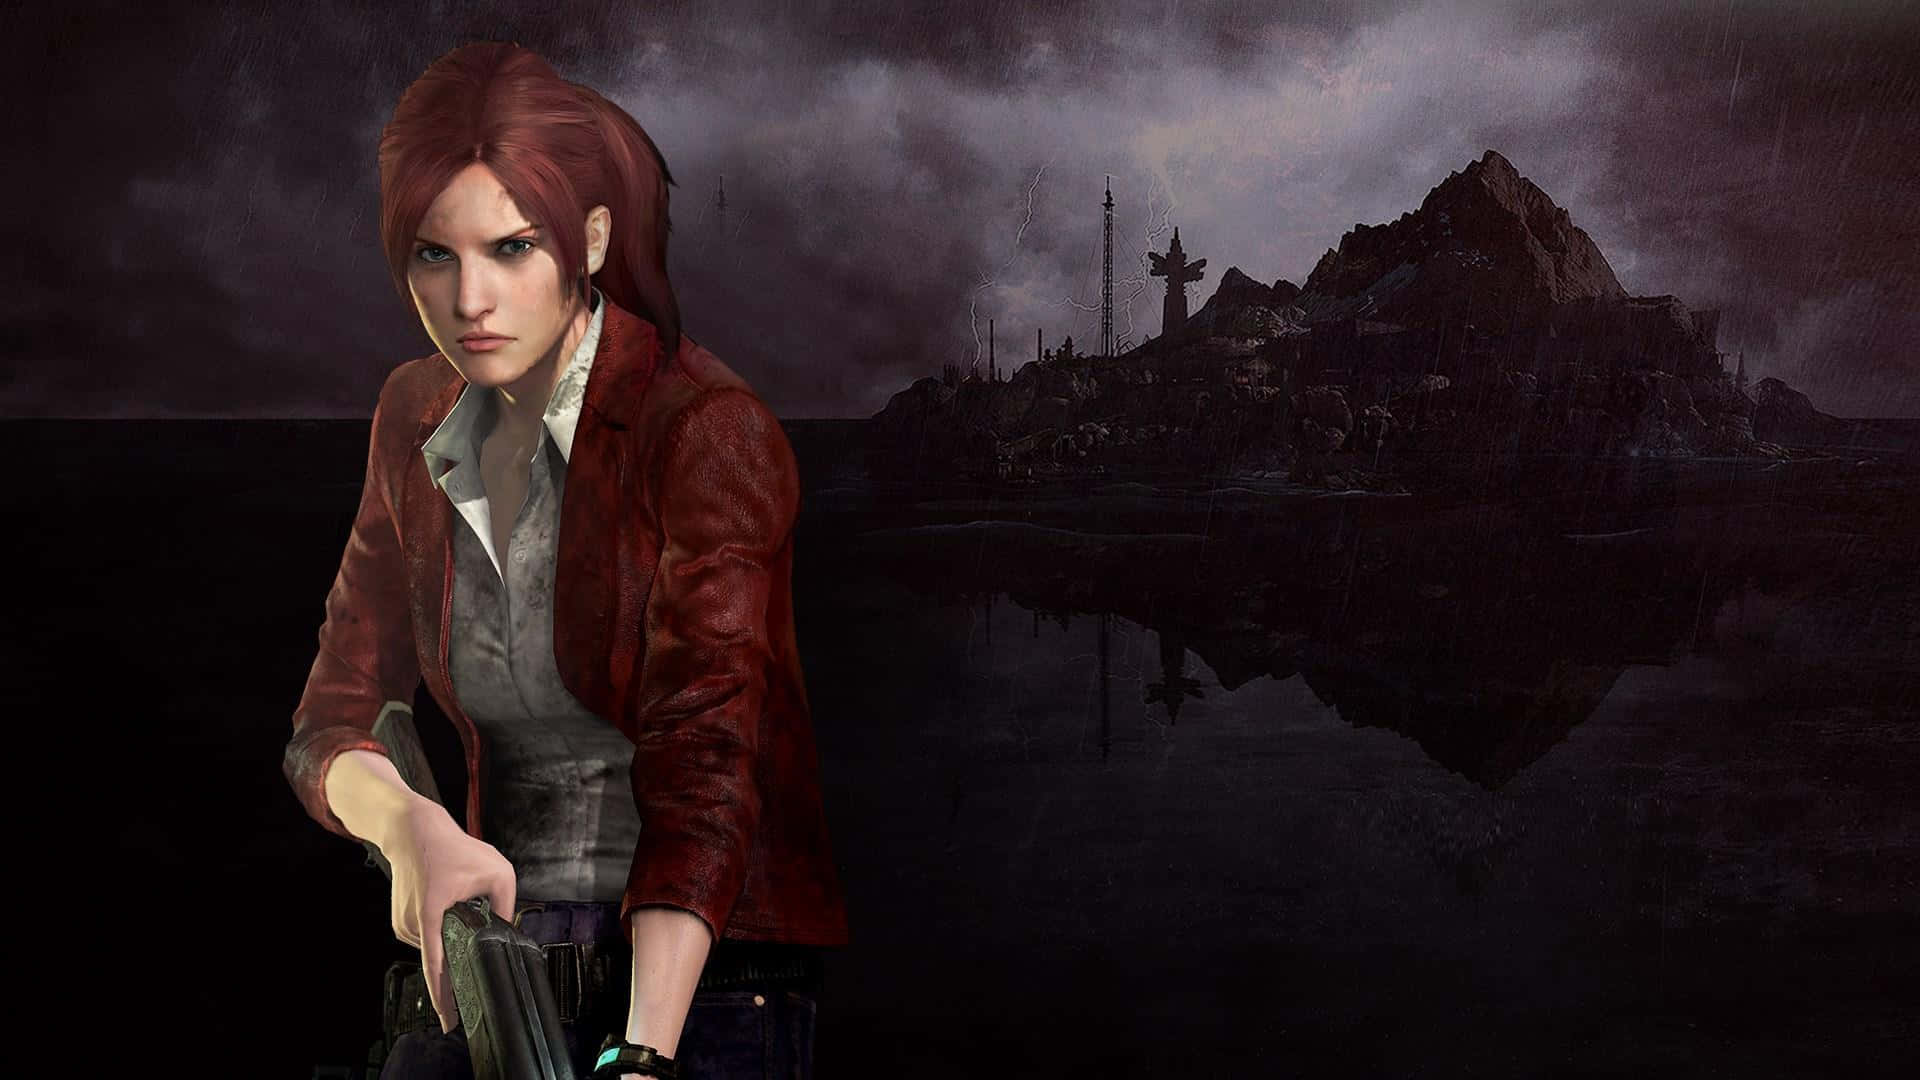 Survive and battle through the nightmarish horrors of the outbreak in Resident Evil Revelations 2. Wallpaper